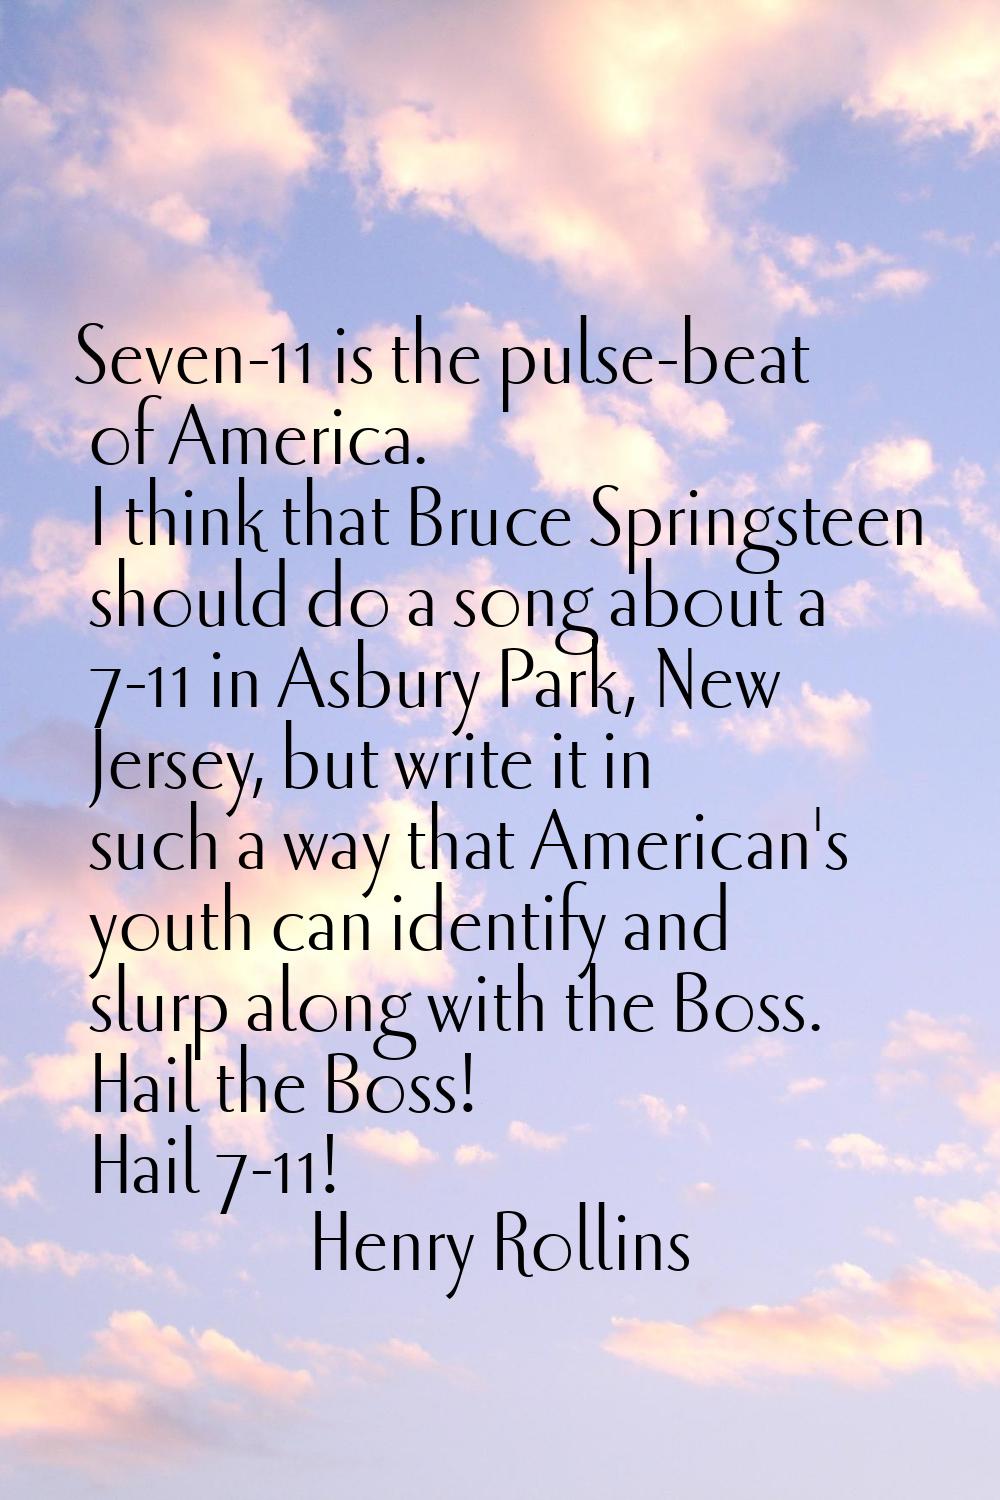 Seven-11 is the pulse-beat of America. I think that Bruce Springsteen should do a song about a 7-11